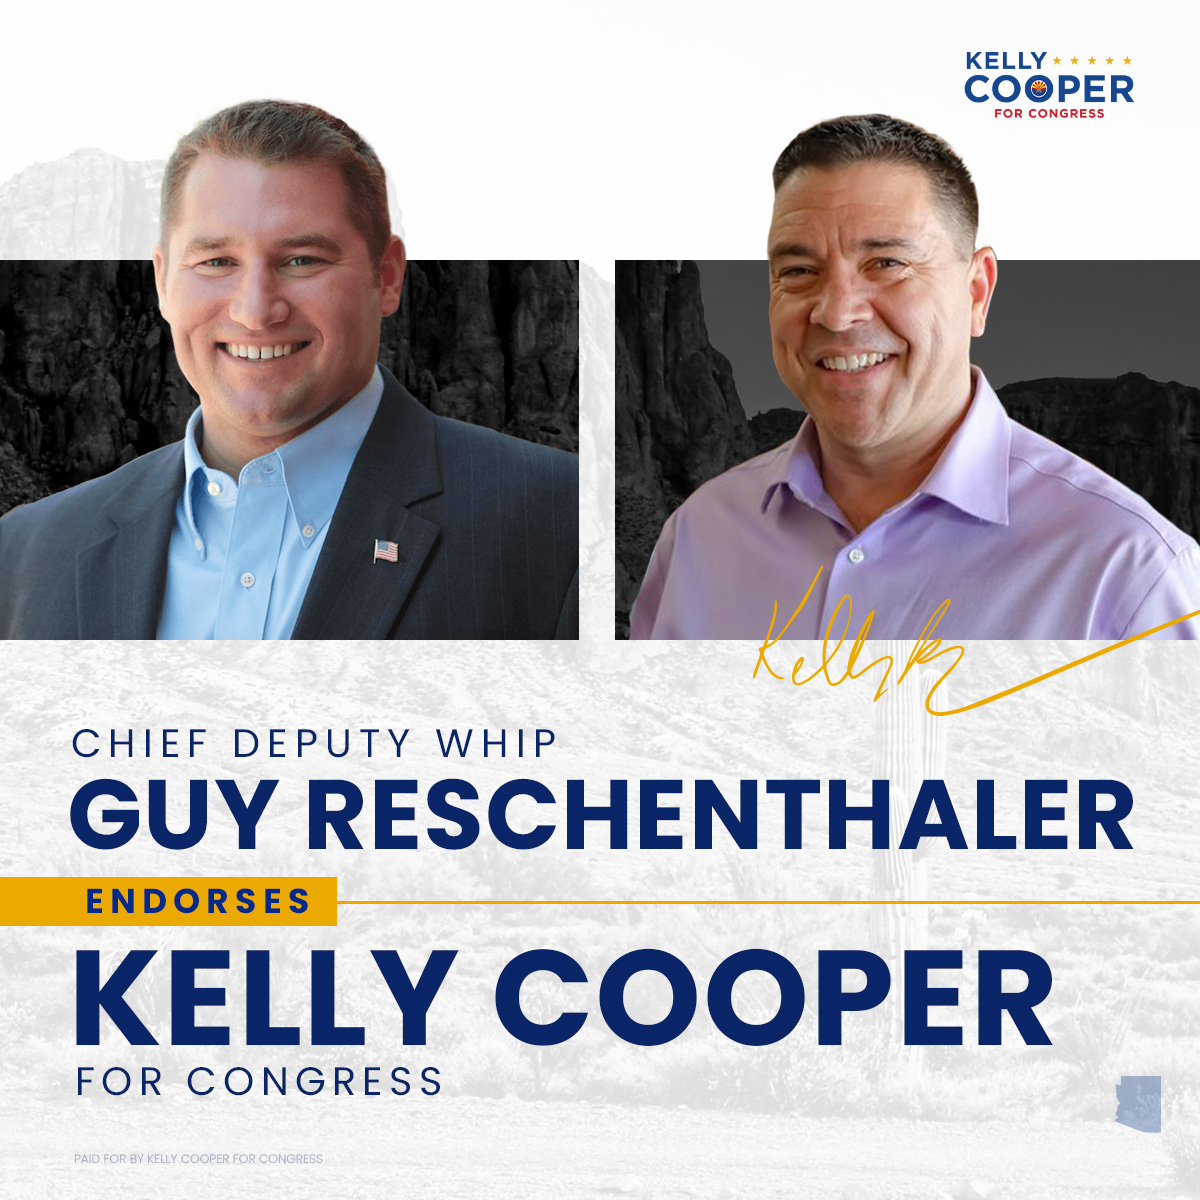 Special thank you to Pennsylvania Congressman and Chief Deputy Whip, Guy Reschenthaler, who has fully endorsed my campaign. Congressman Reschenthaler will join me in Arizona this Monday to campaign with me and advance our shared mission.